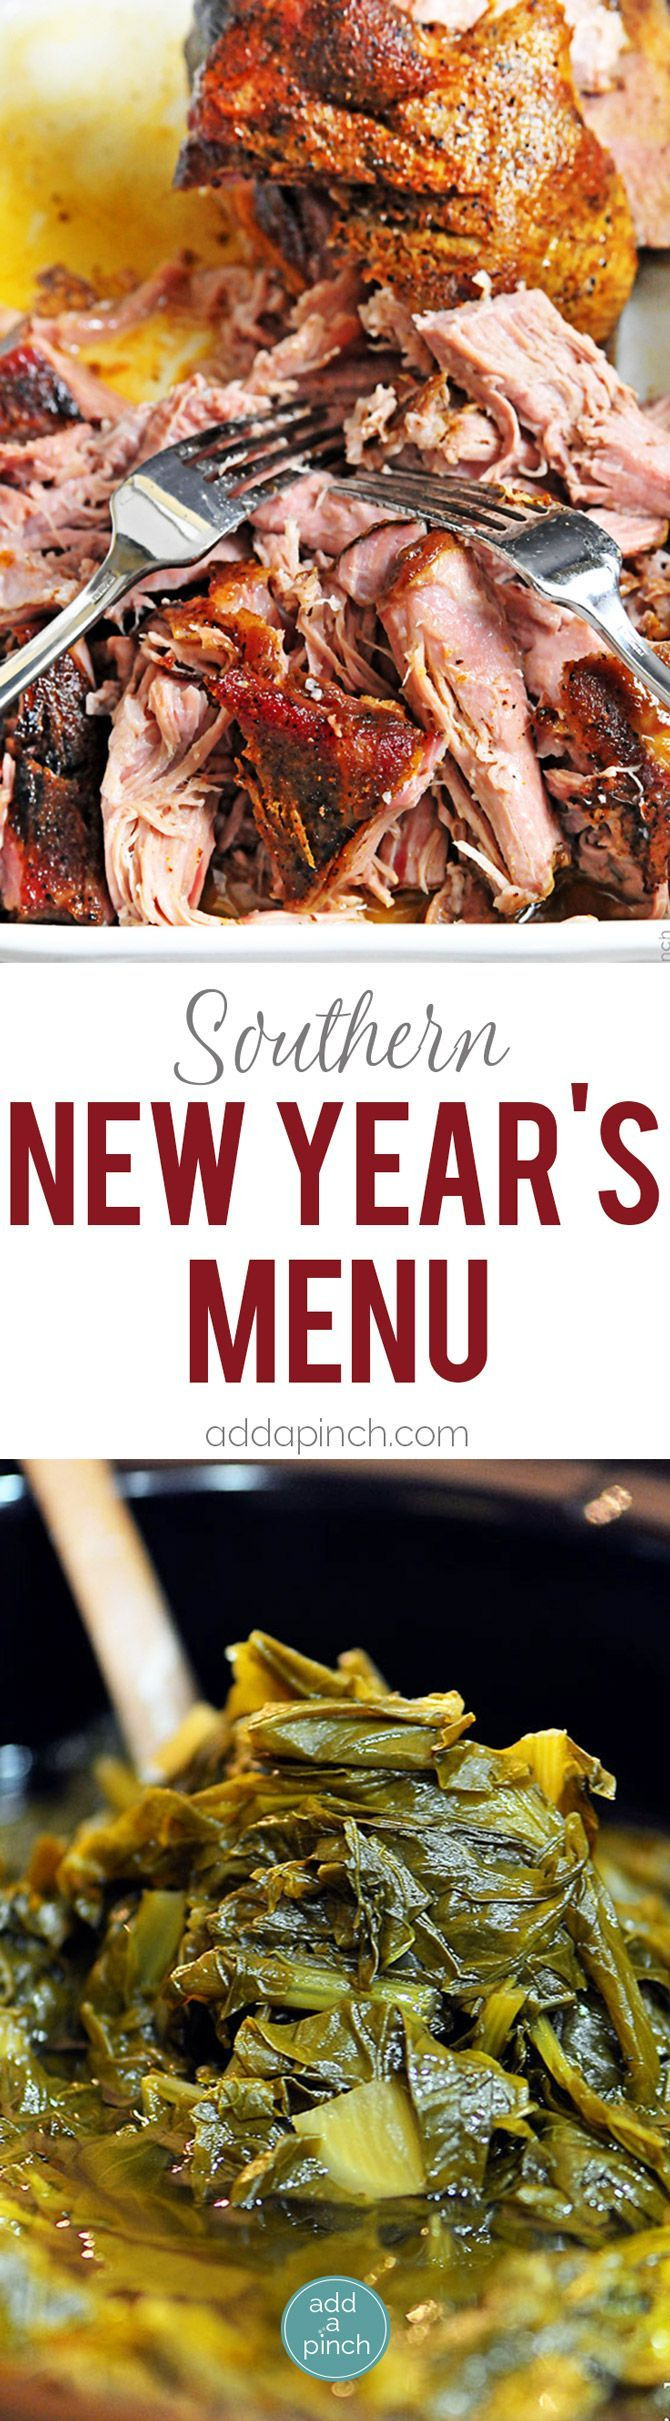 New Year Day Dinner Recipes
 Southern New Year s Menu